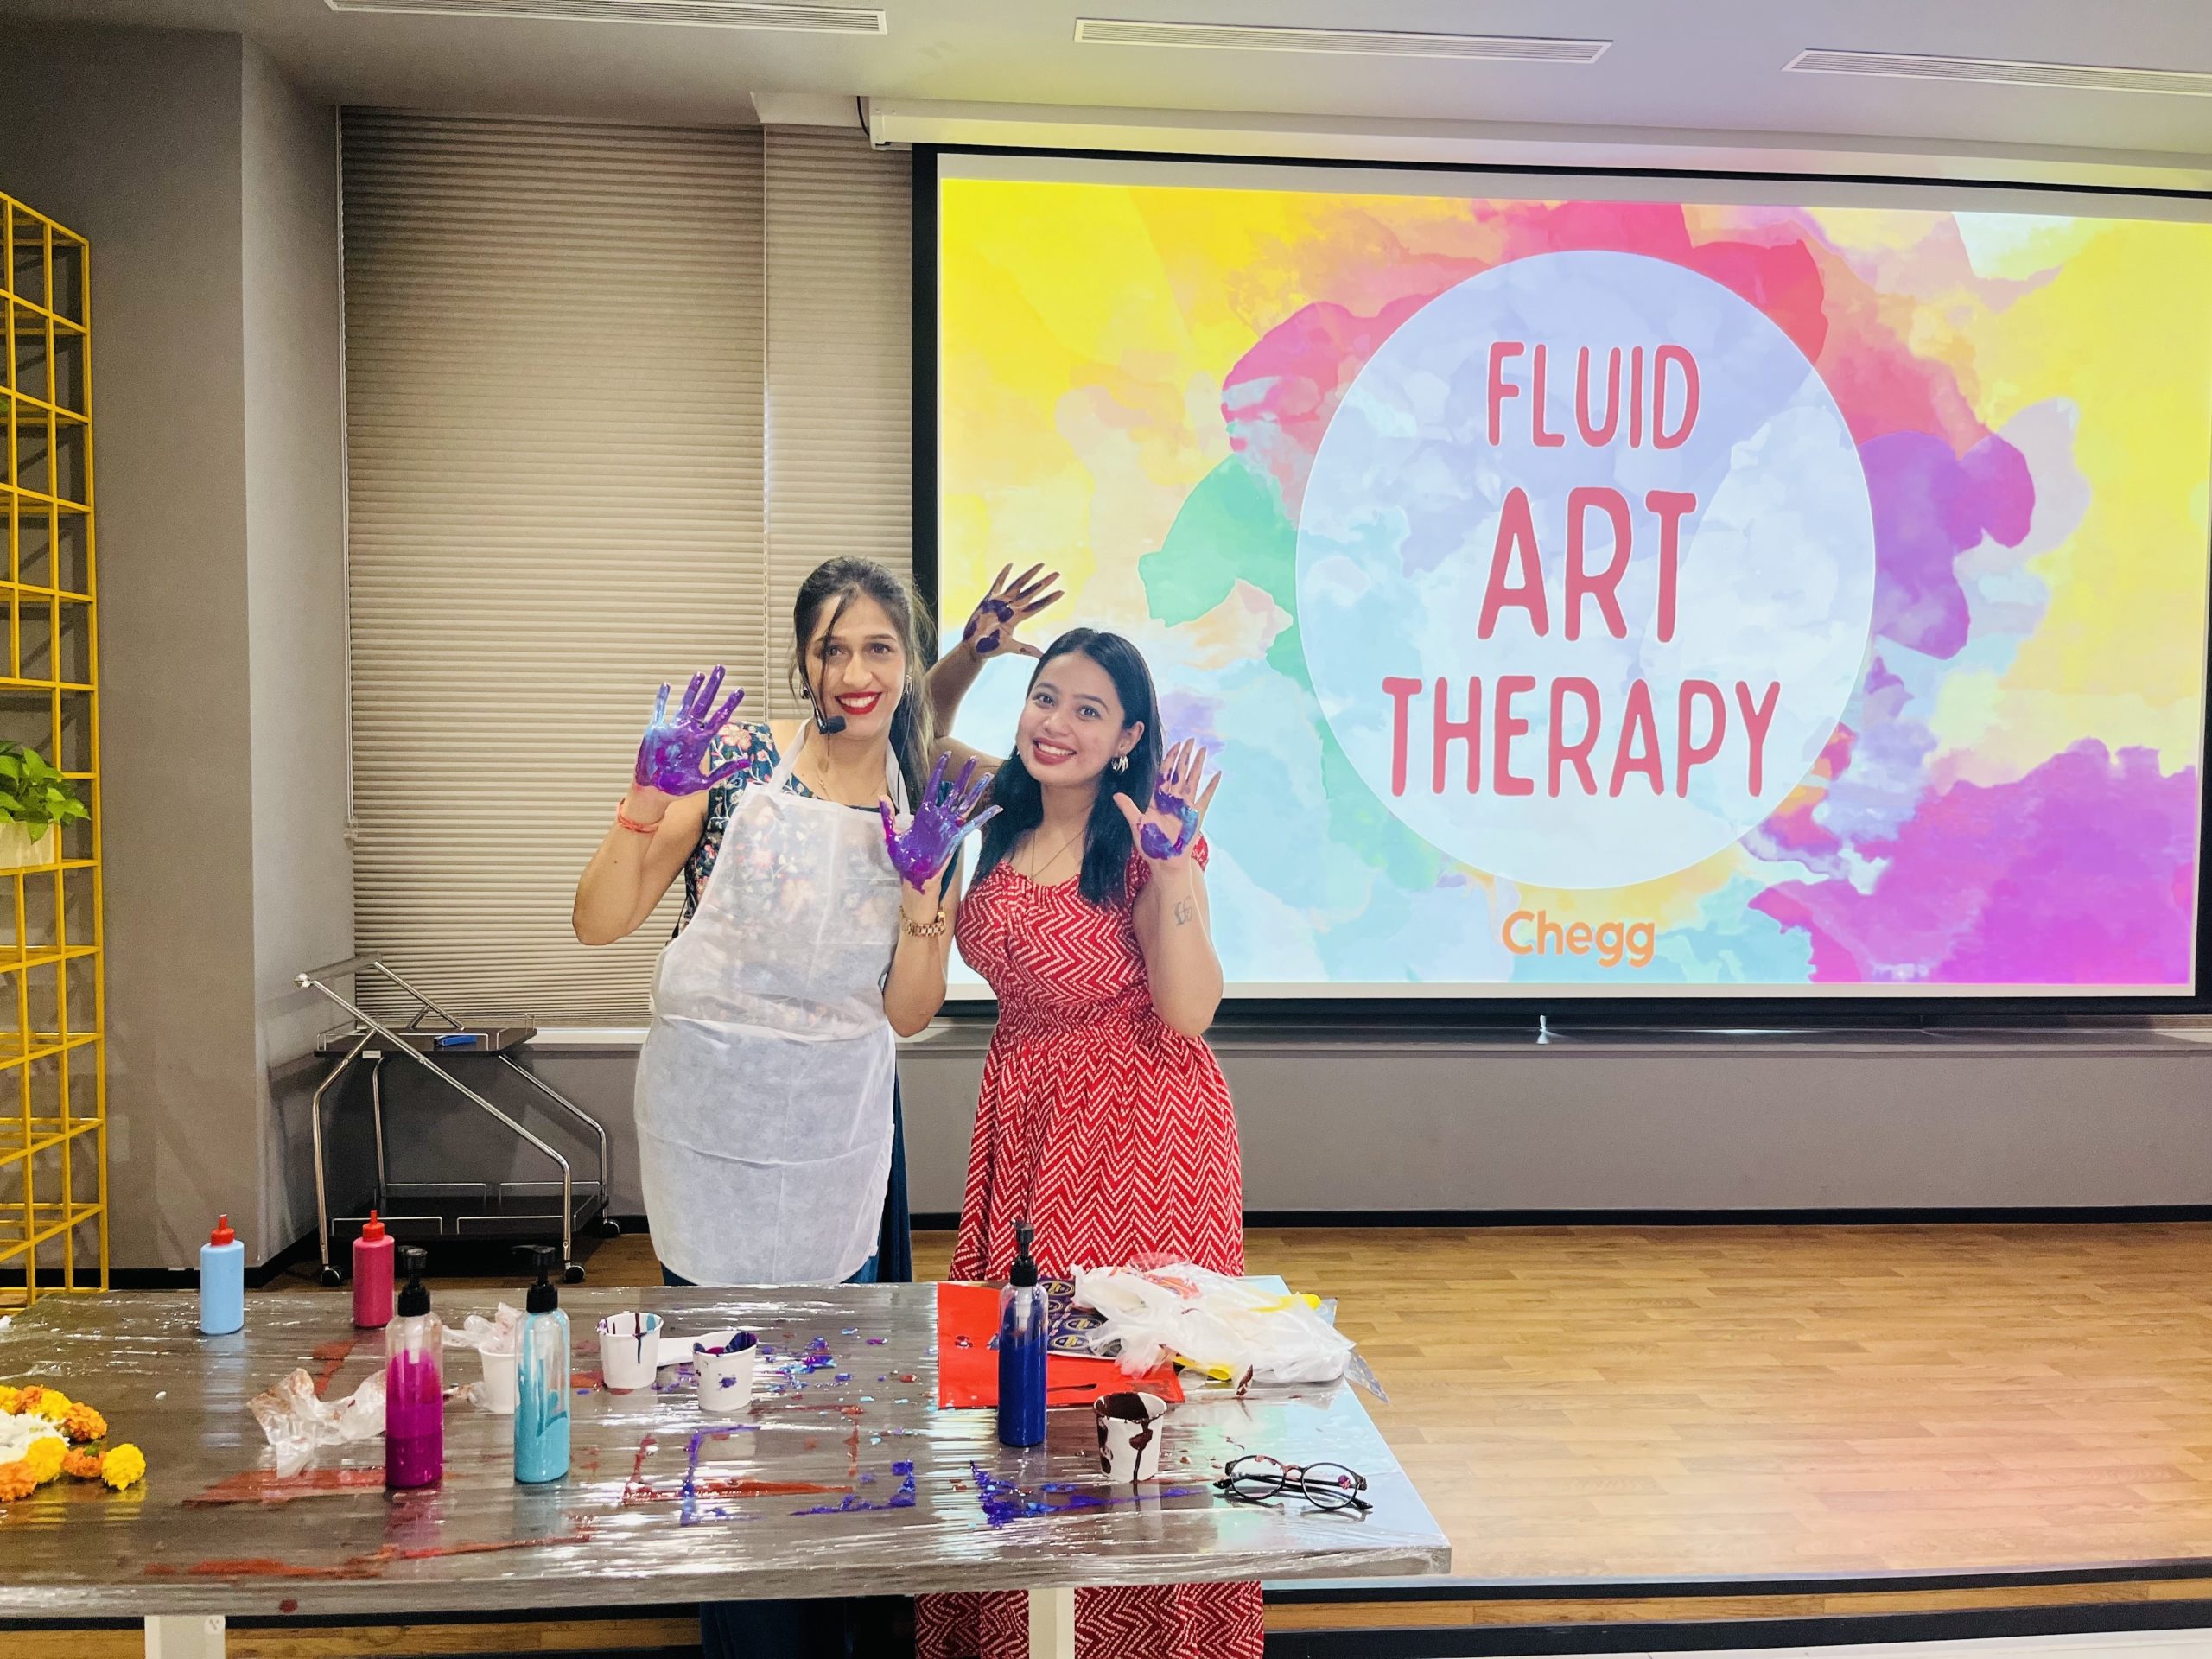 Flui-art-therapy